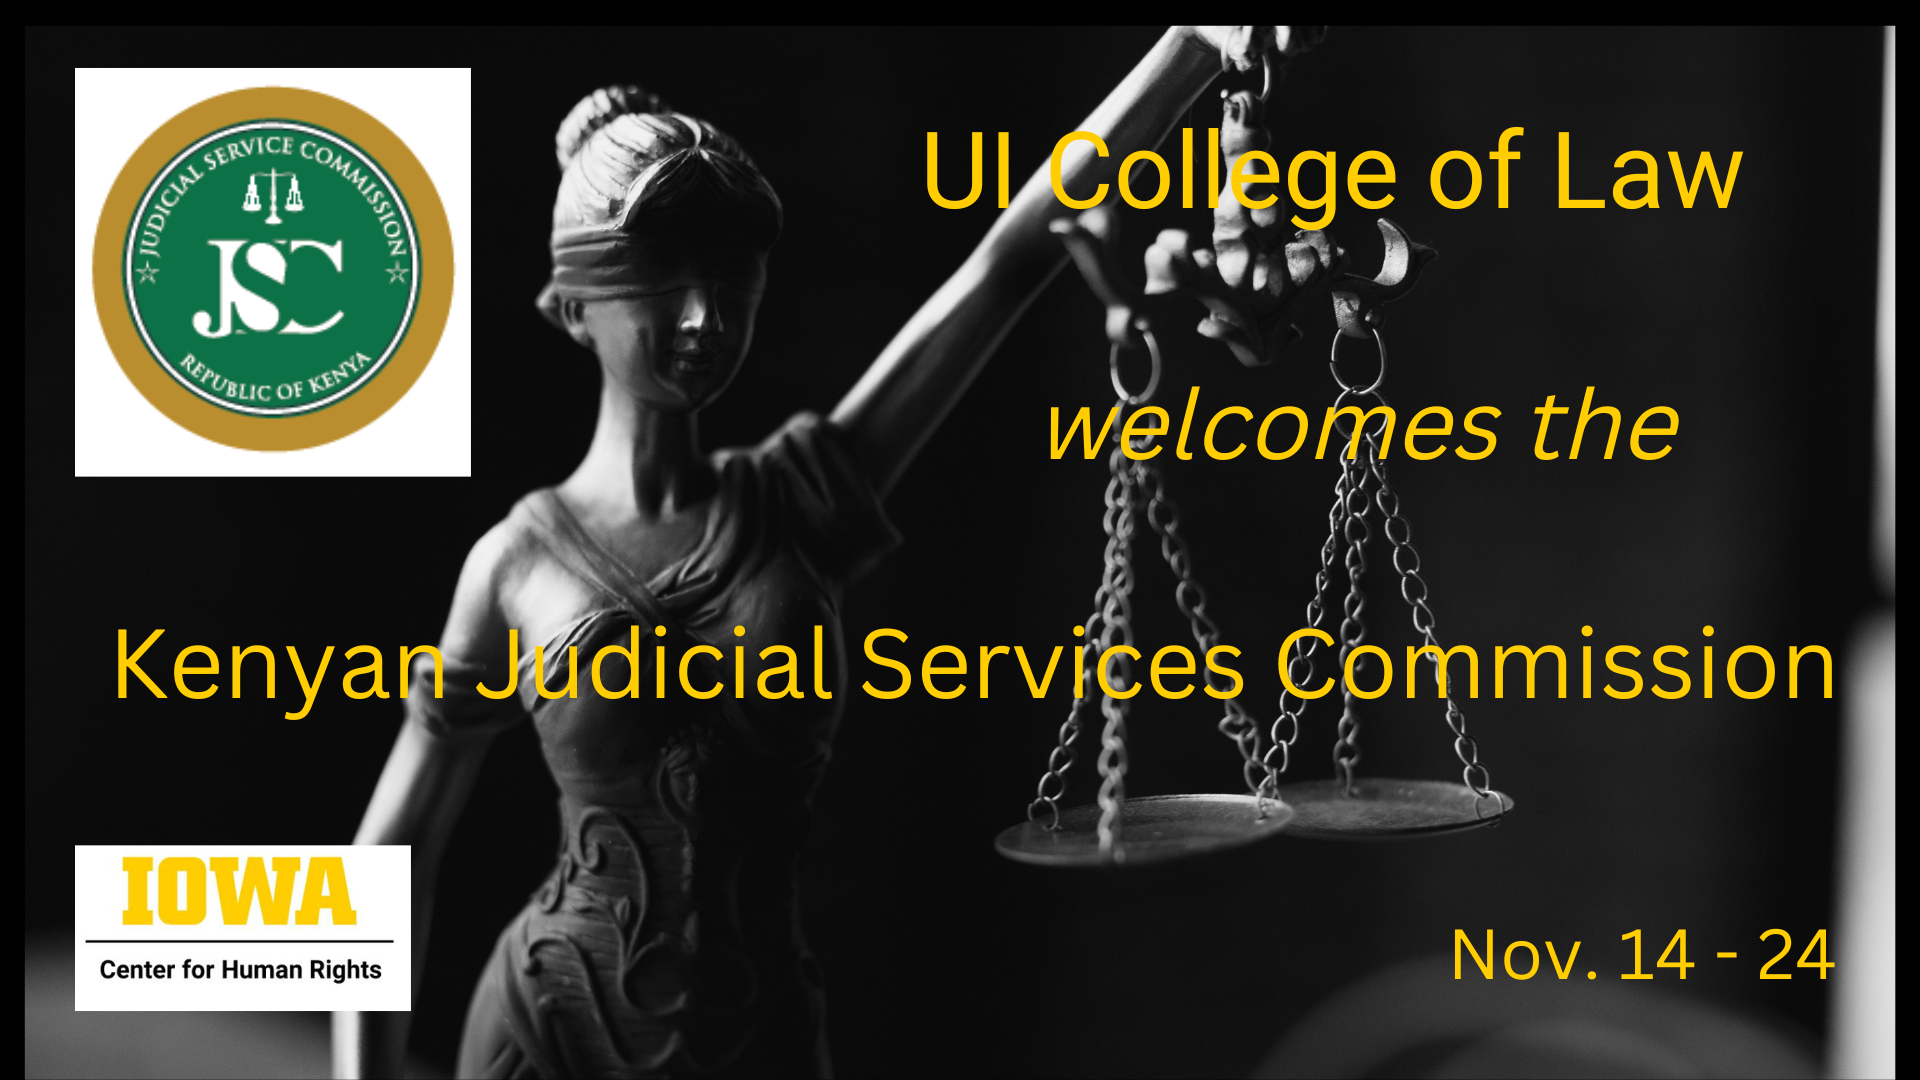 UI College of Law welcomes the Kenyan Judicial Services Commission. November 14-24